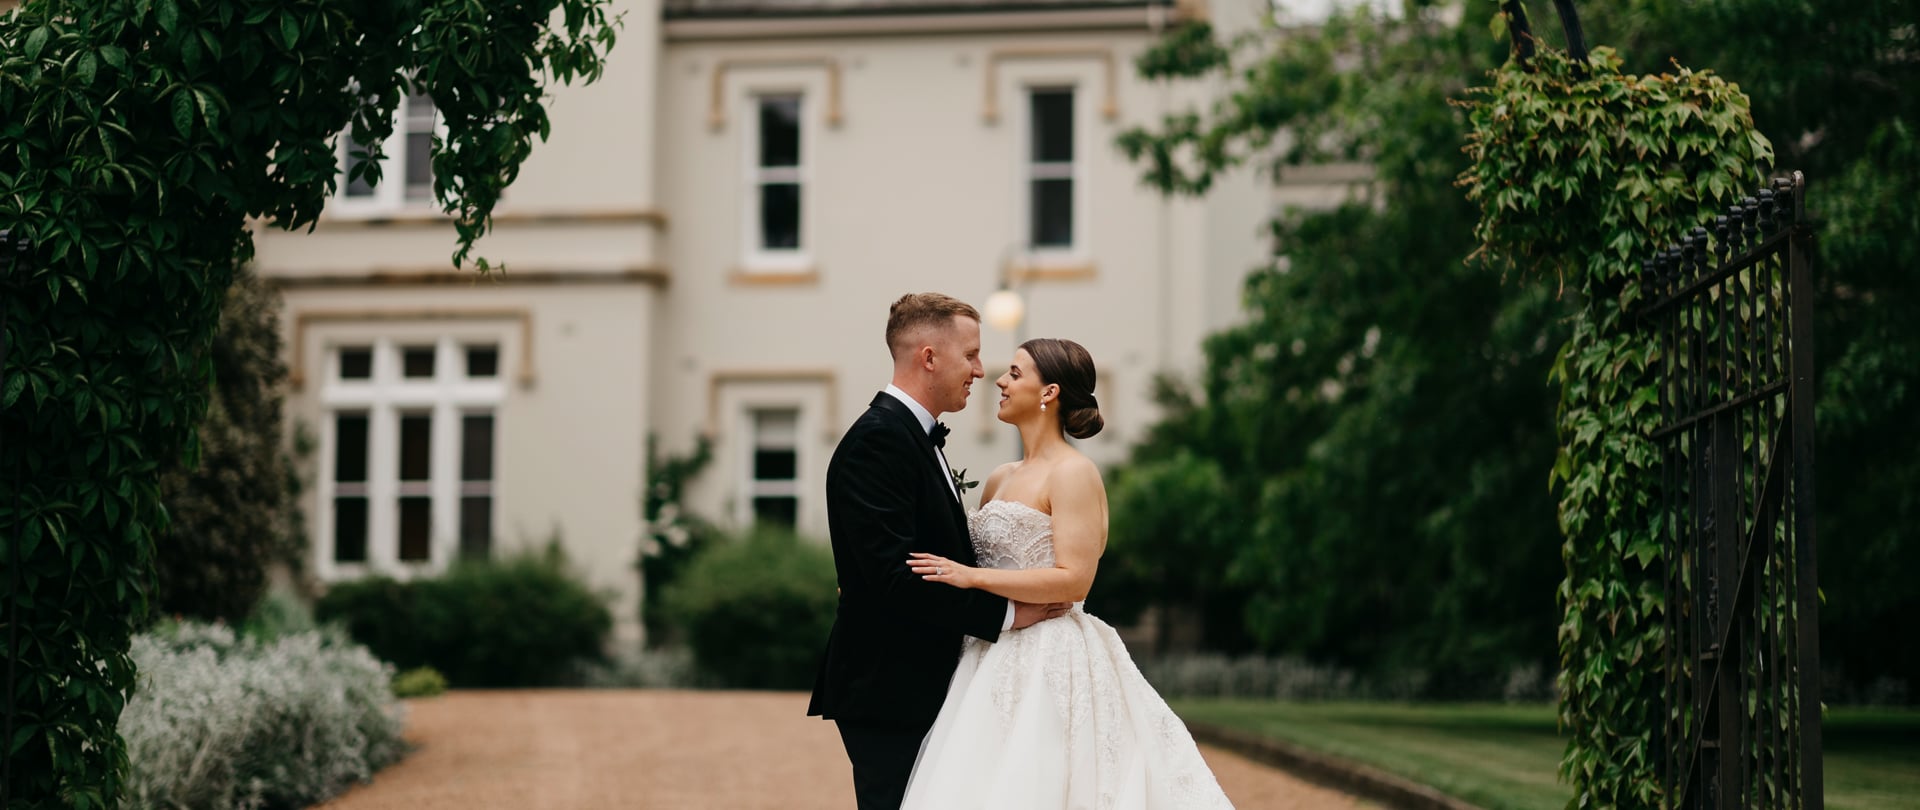 Abby & Jamie Wedding Video Filmed at Bowral, New South Wales